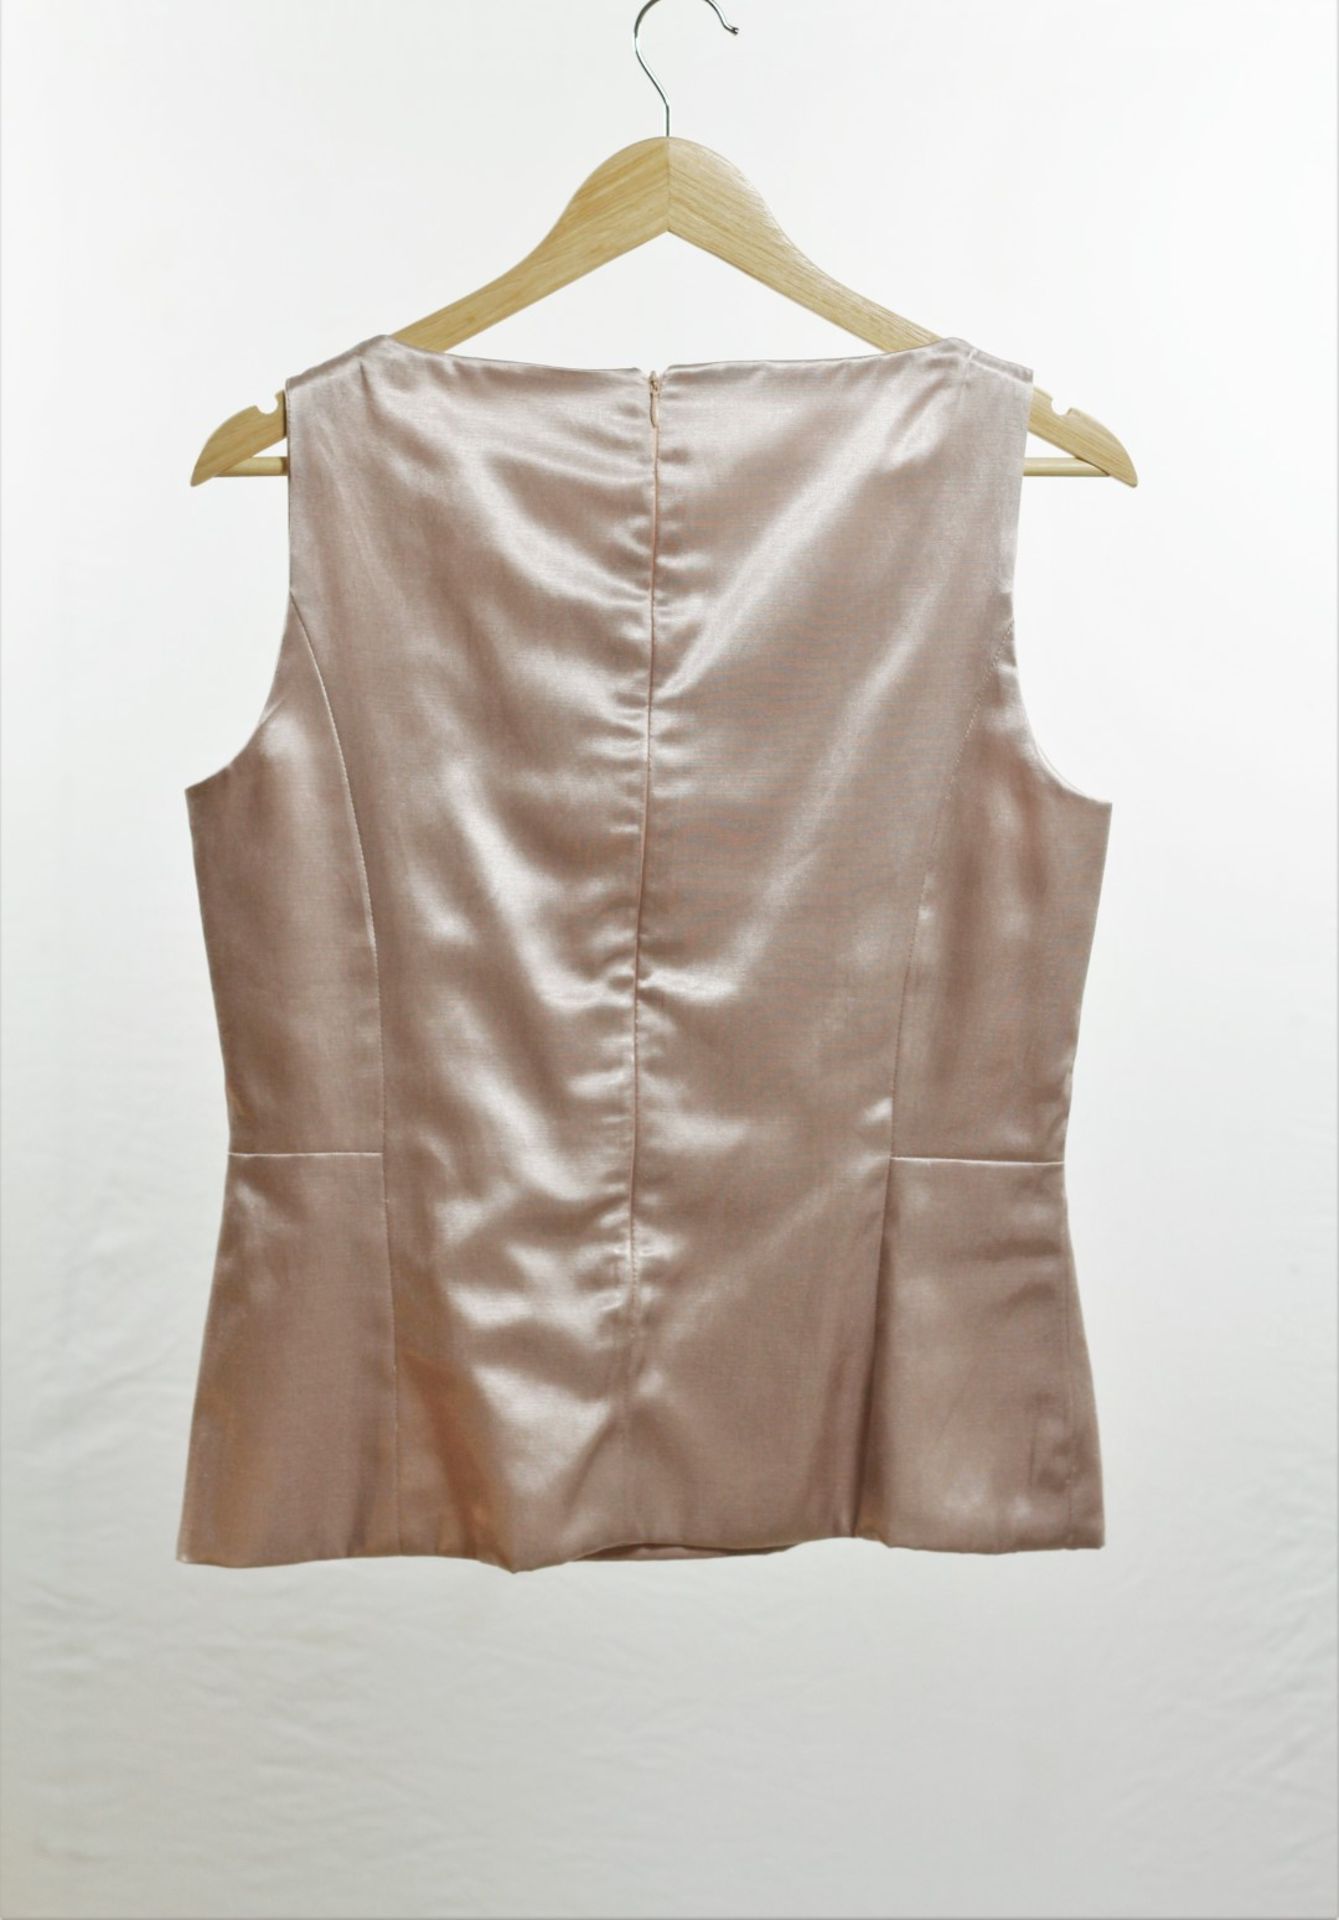 1 x Boutique Le Duc Pale Rose Vest - From a High End Clothing Boutique In The - Image 2 of 8